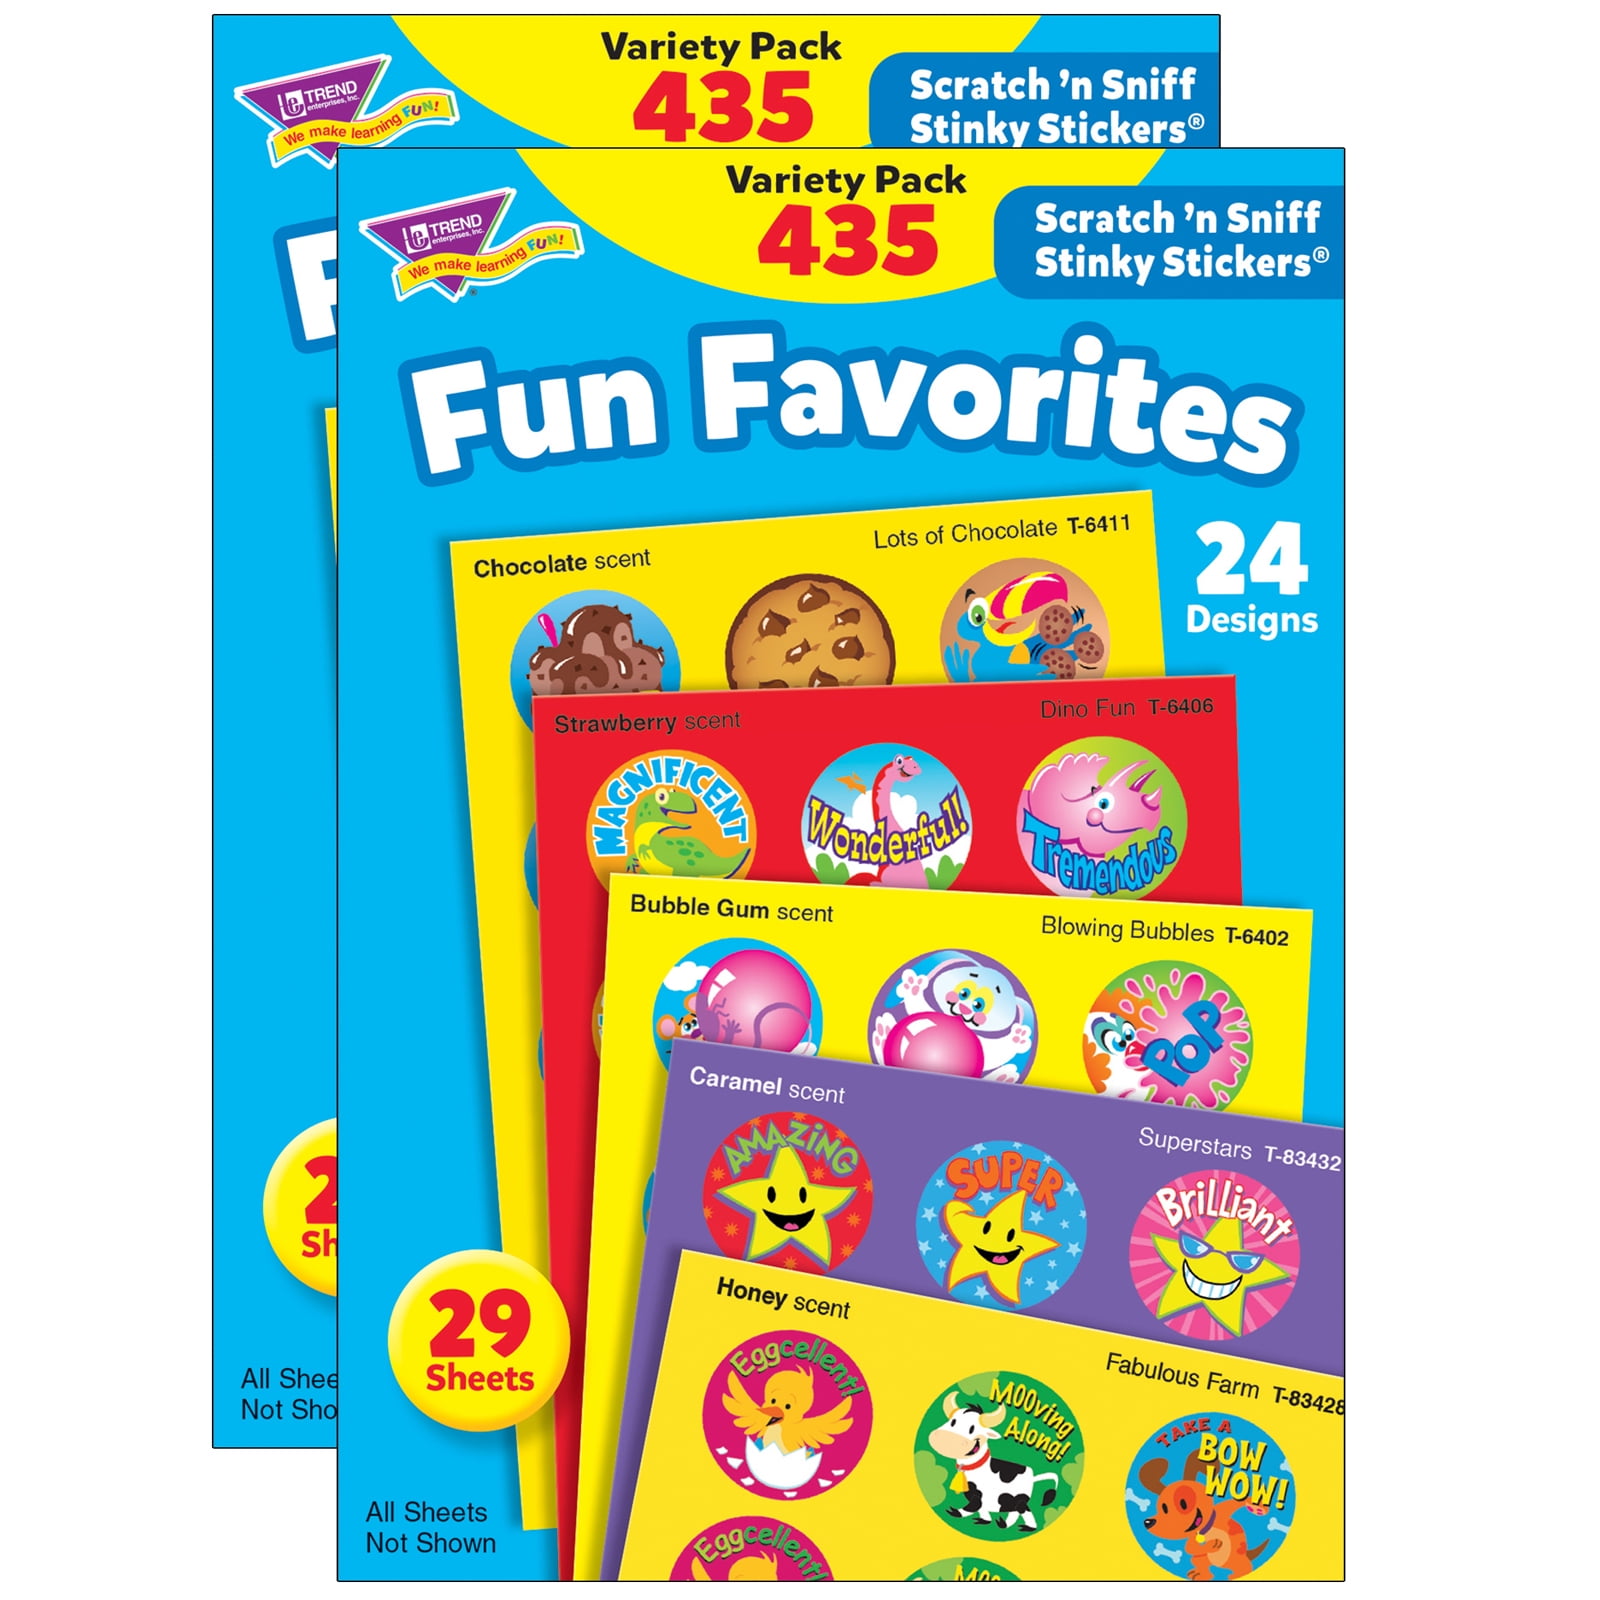 2730 Count Teacher Star Reward Stickers for Kids and Students, Small Sticker for Behavior Chart, Classroom Supplies, 30 Sheets, Assorted Designs